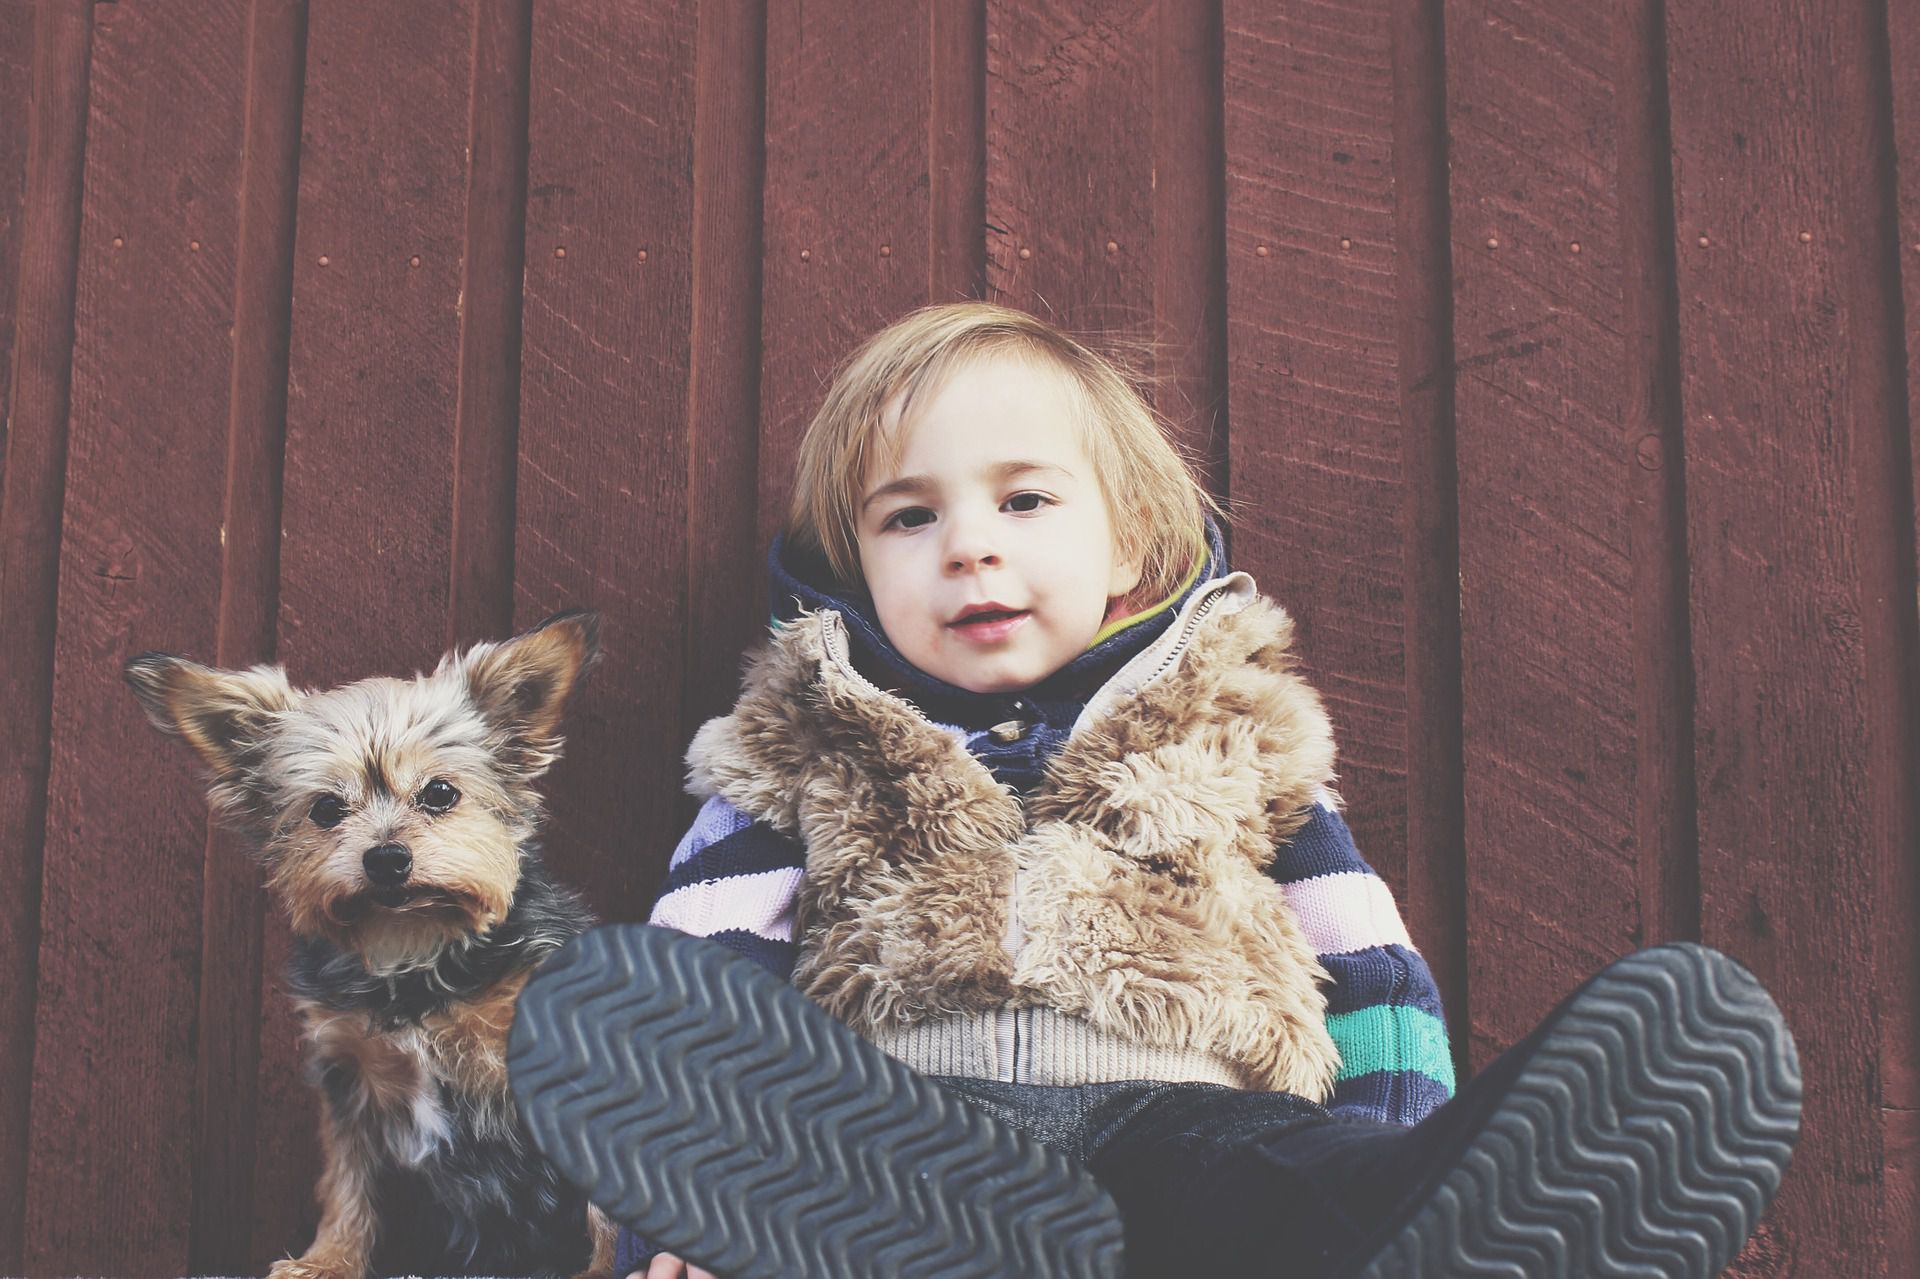 At What Age Should You Get a Pet for Your Child?